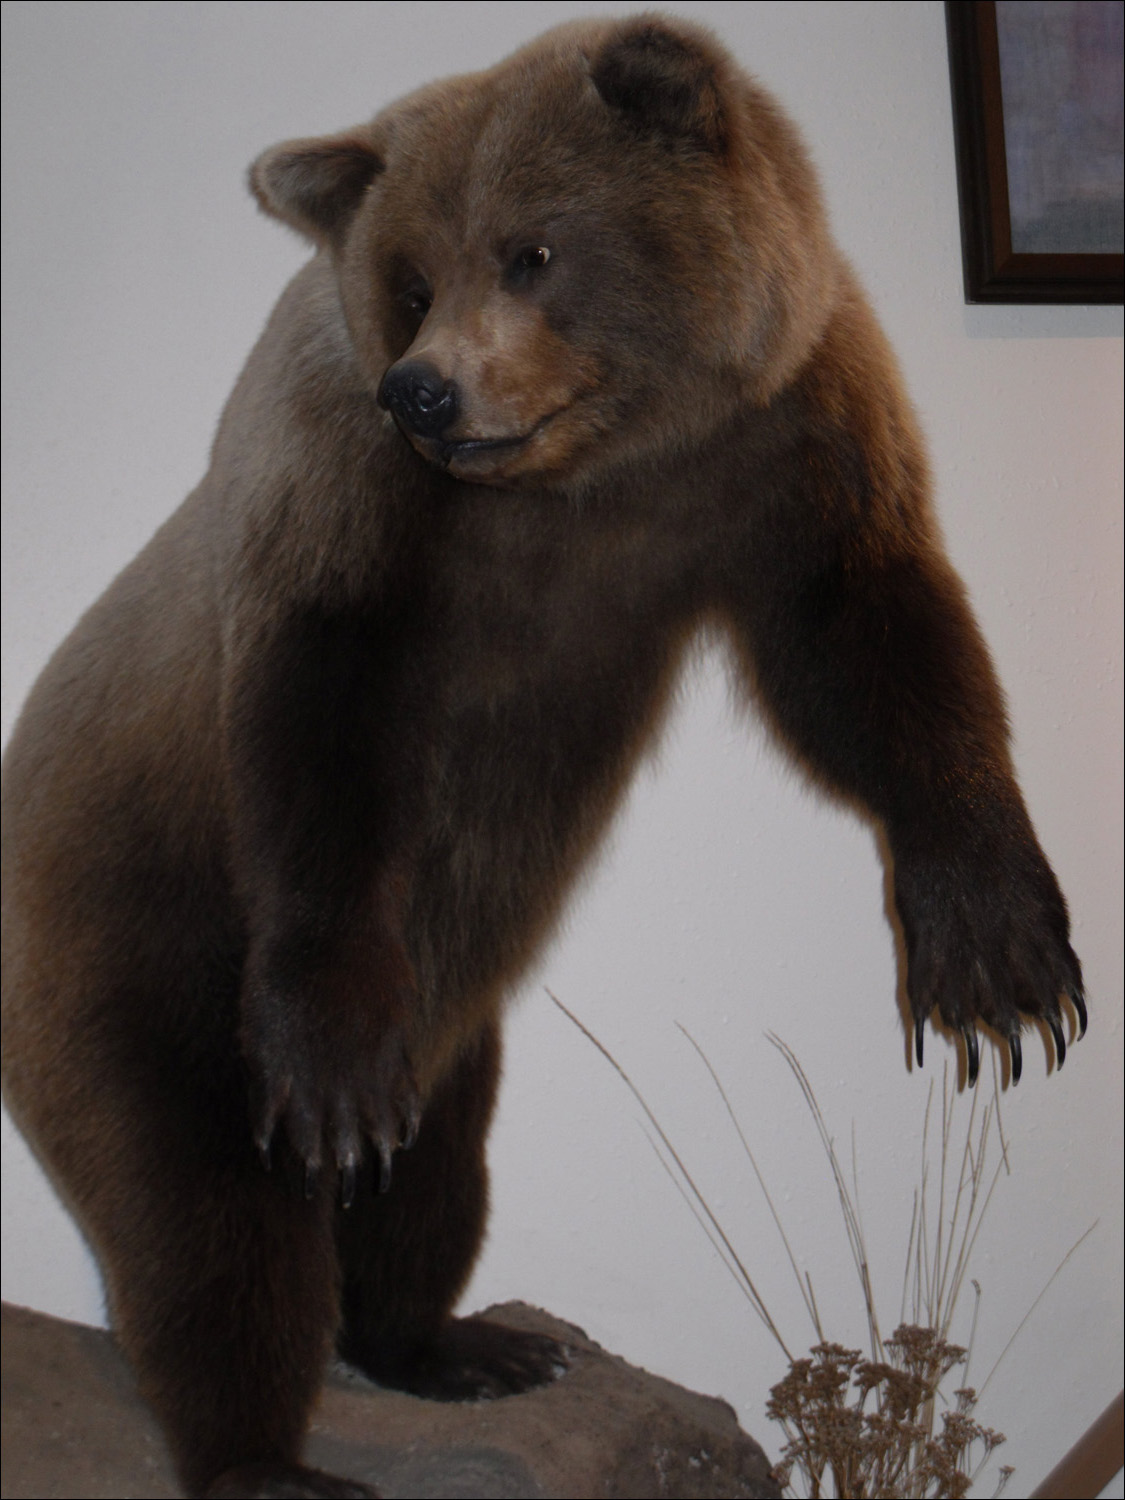 Fort Benton, MT Agriculture Museum-grizzly bear